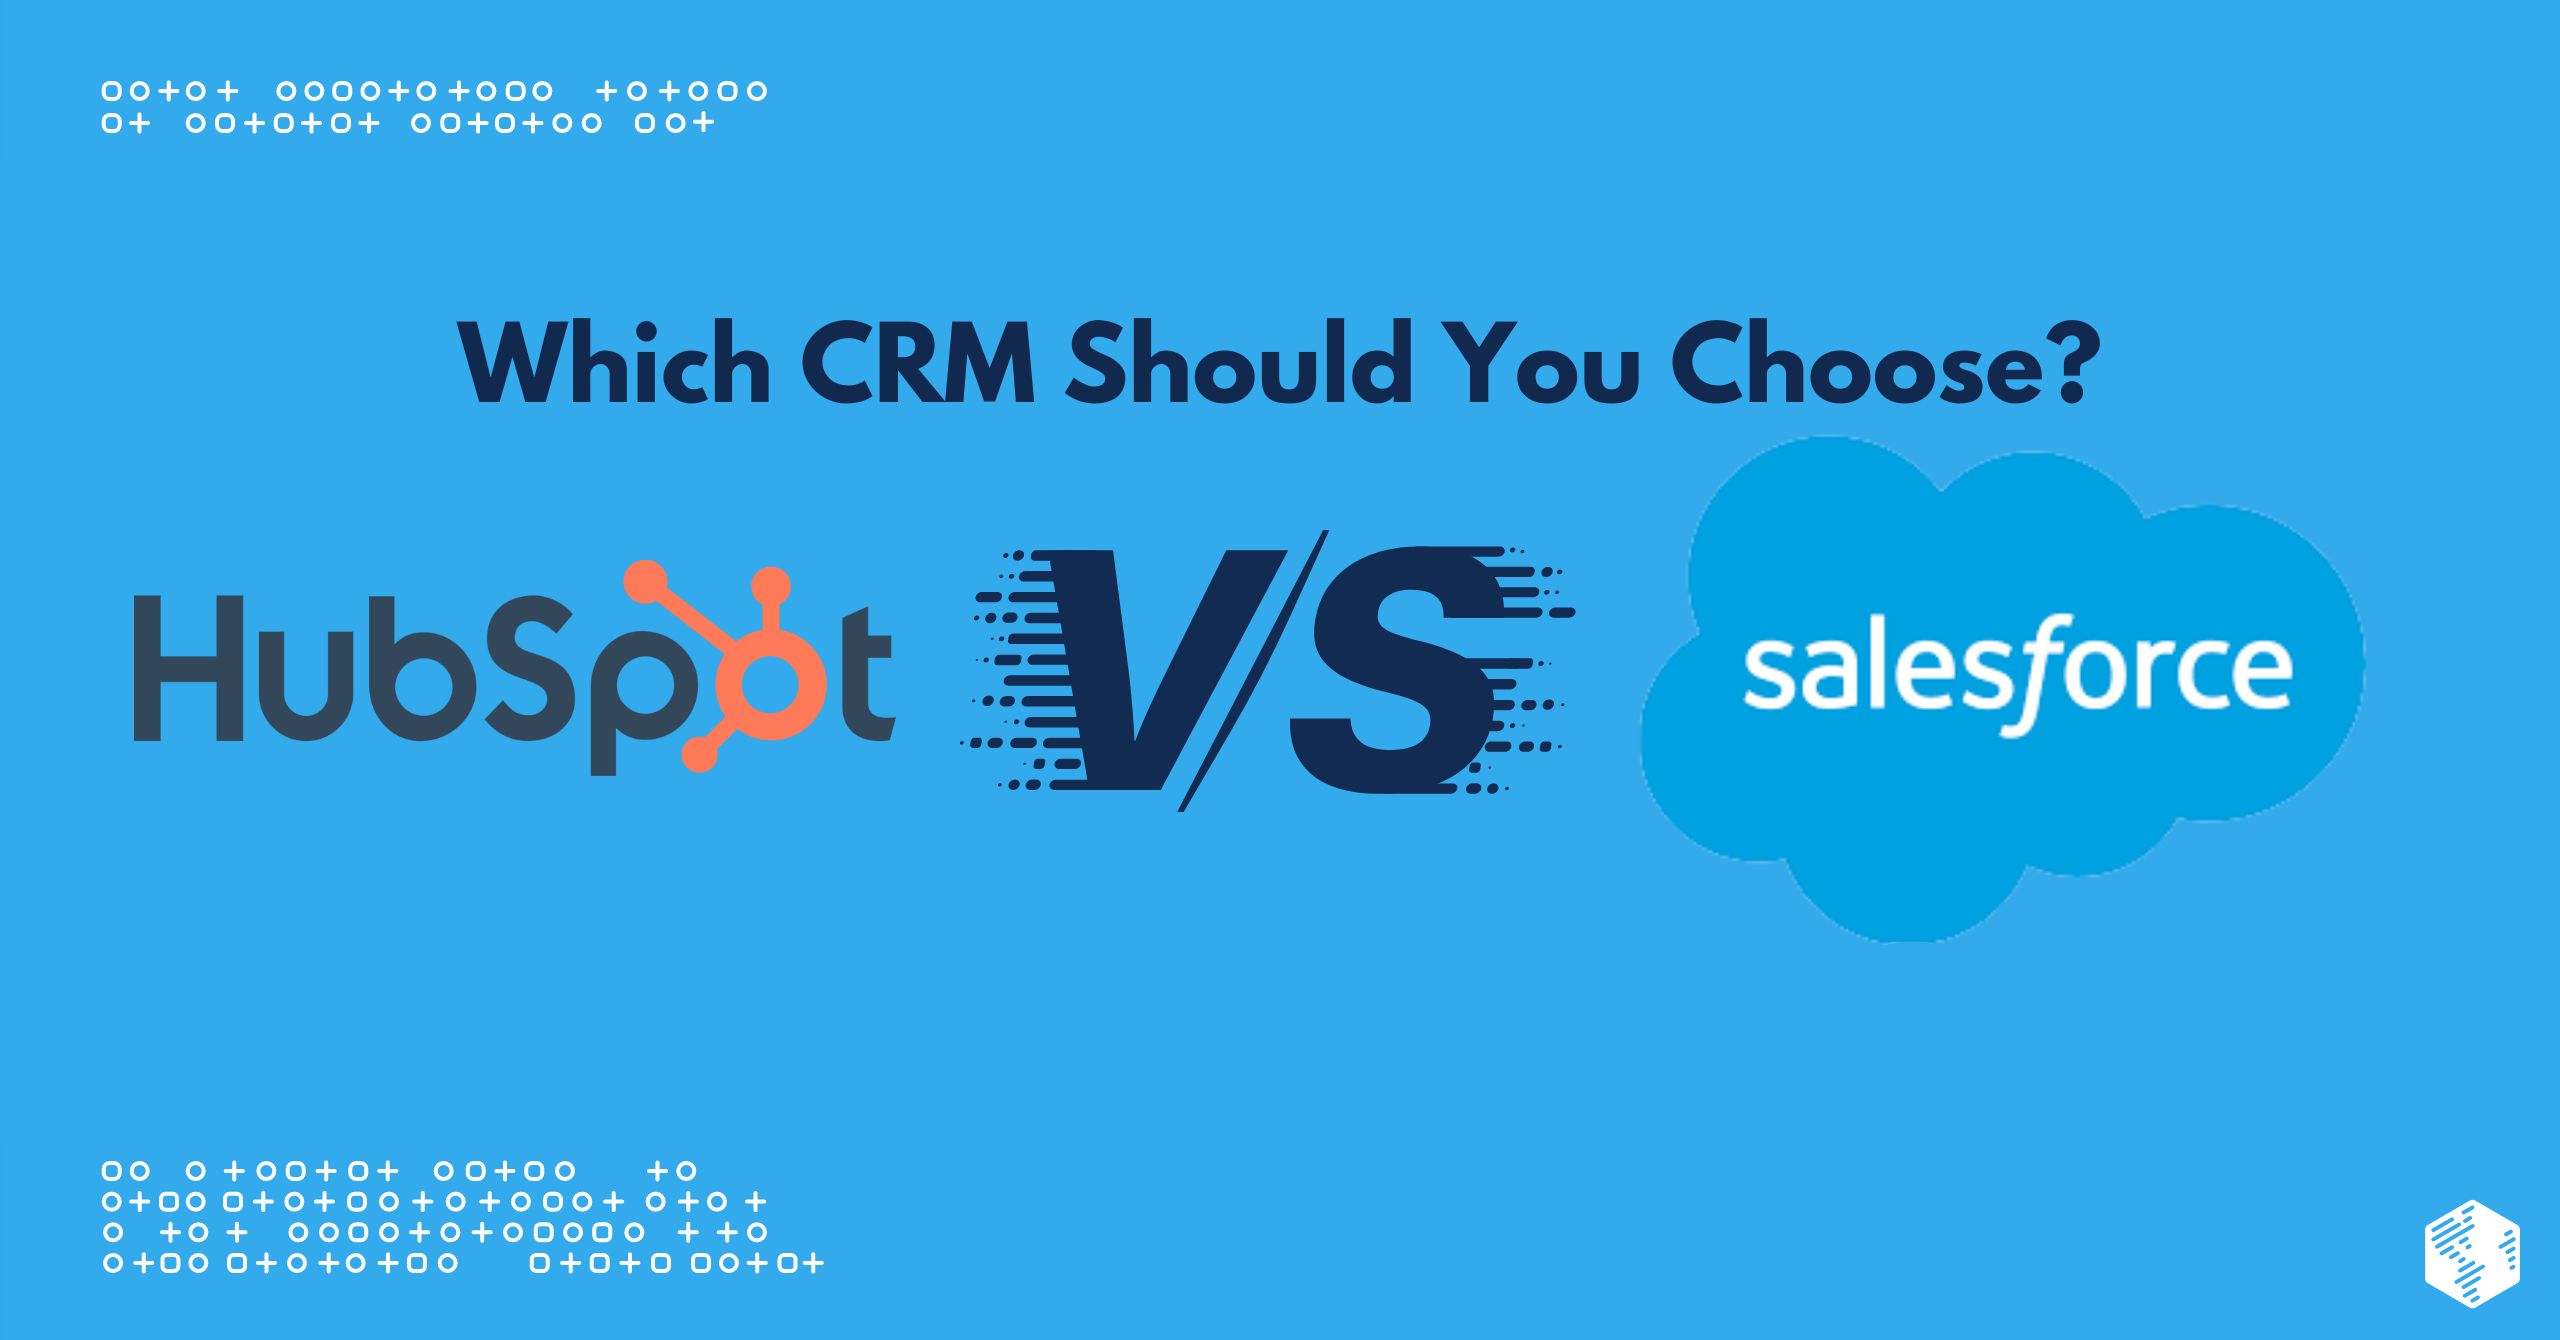 How do you choose the best customer relationship management (CRM) software for your B2B company? Read our guide to HubSpot vs. Salesforce to learn more.